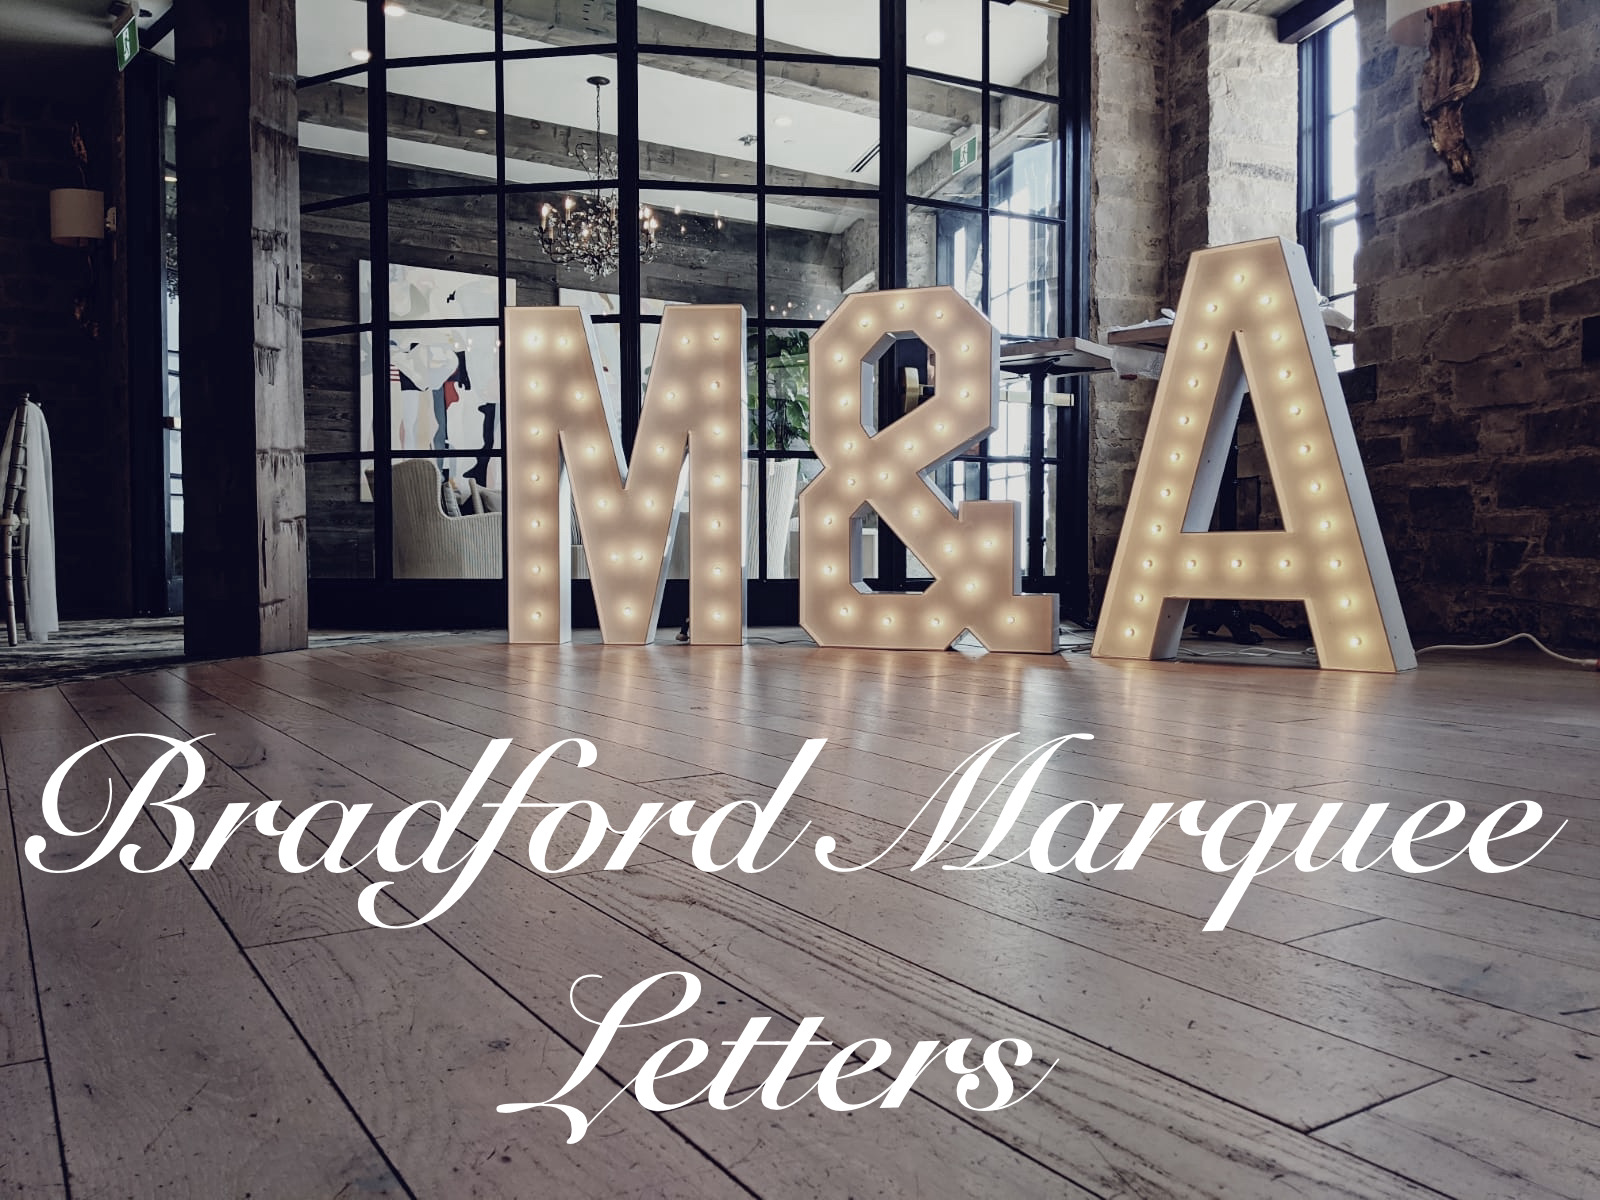 bradford marquee letters rental company